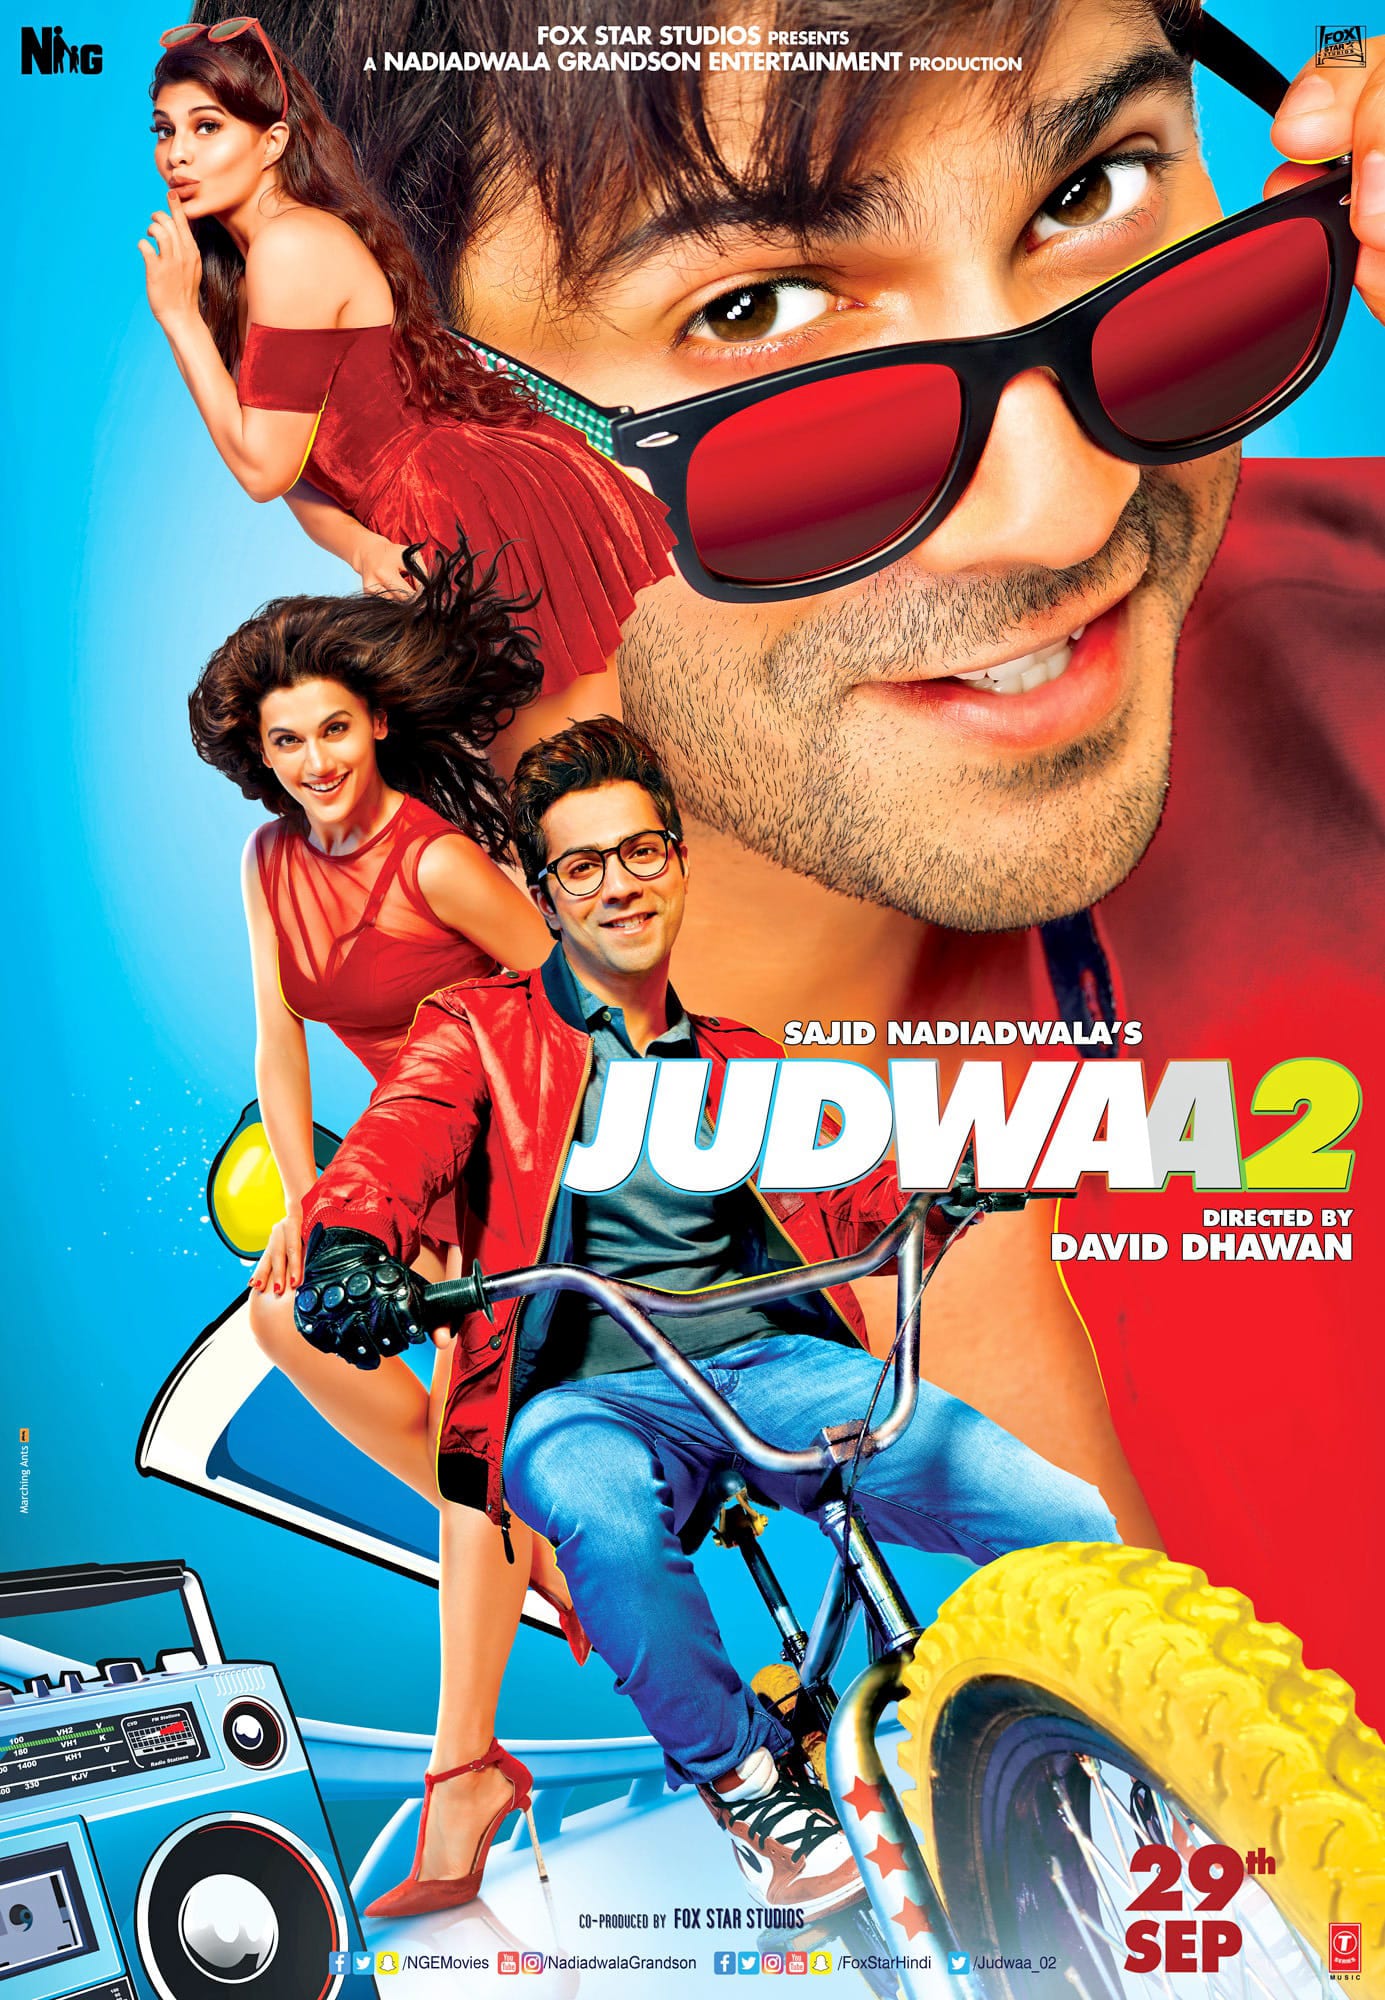 Poster for the movie "Judwaa 2"